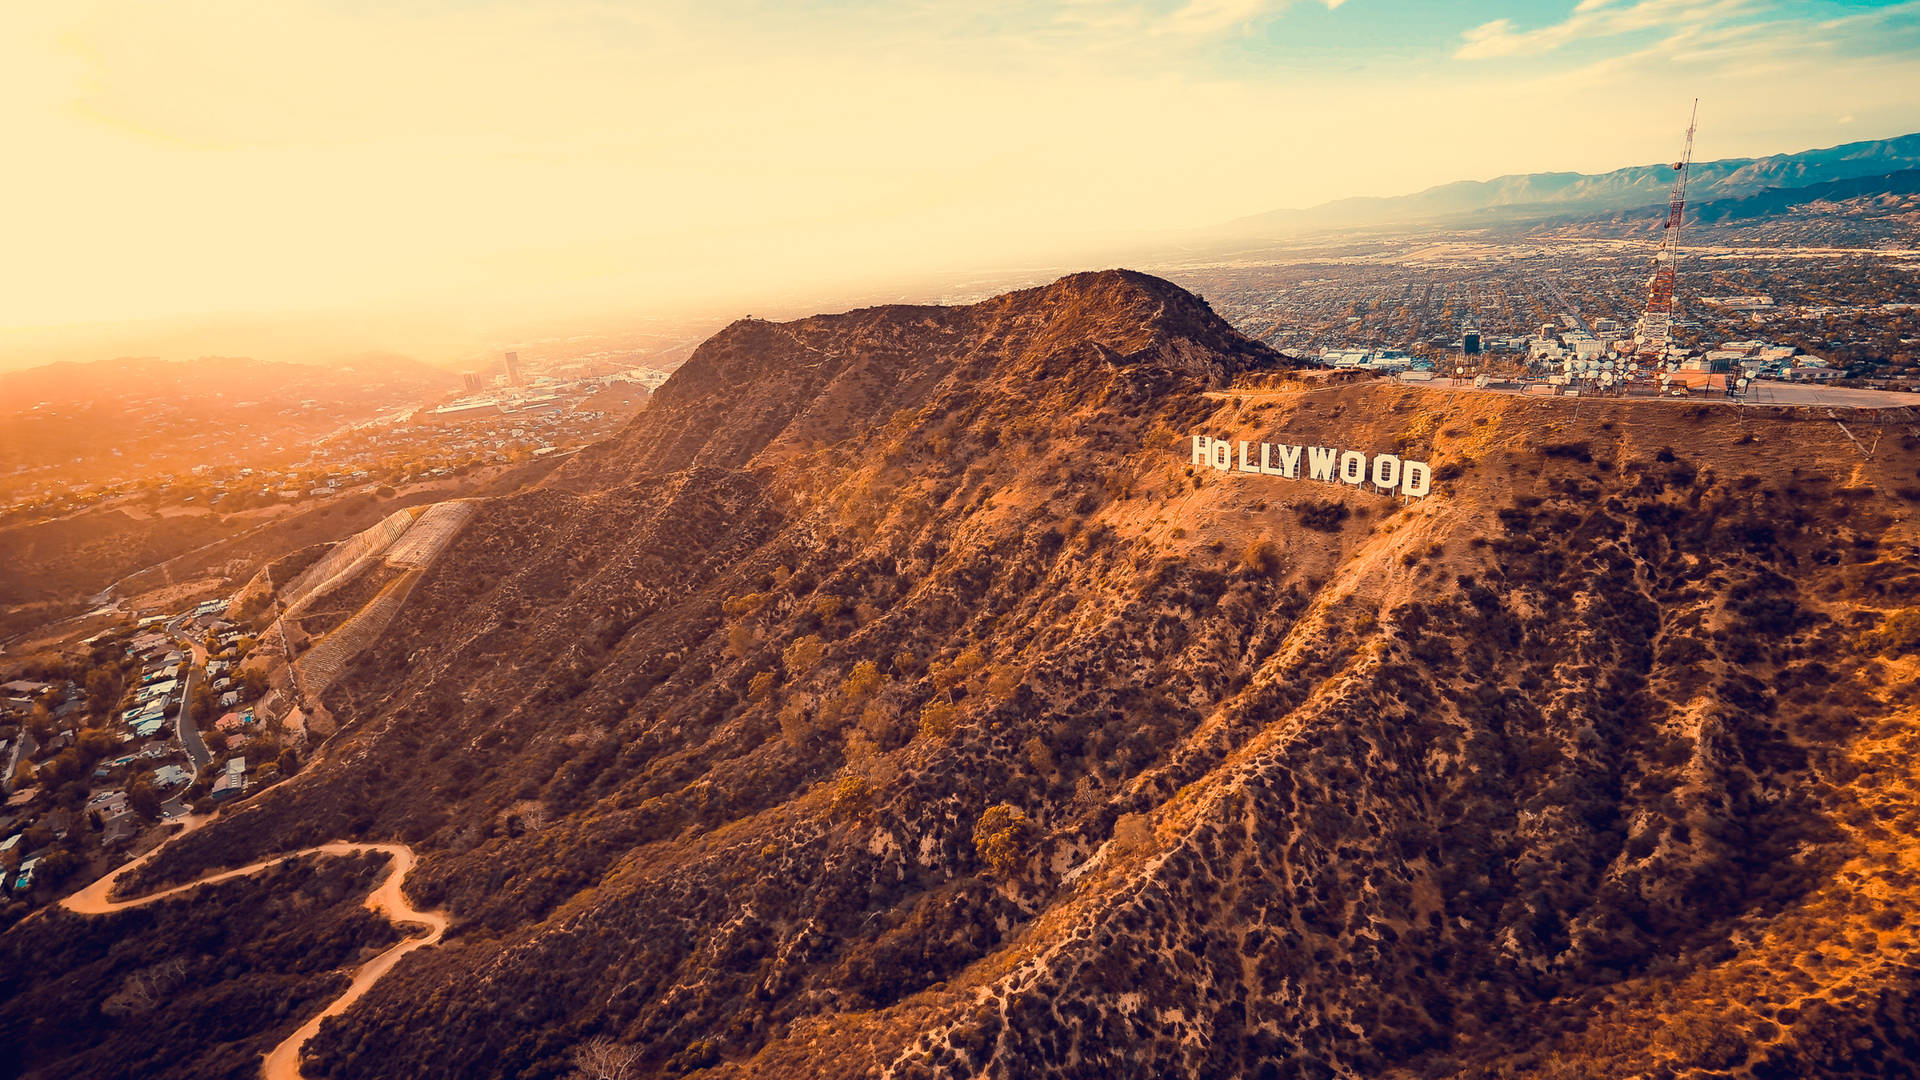 Hollywood Sign In Los Angeles 4k Wallpaper